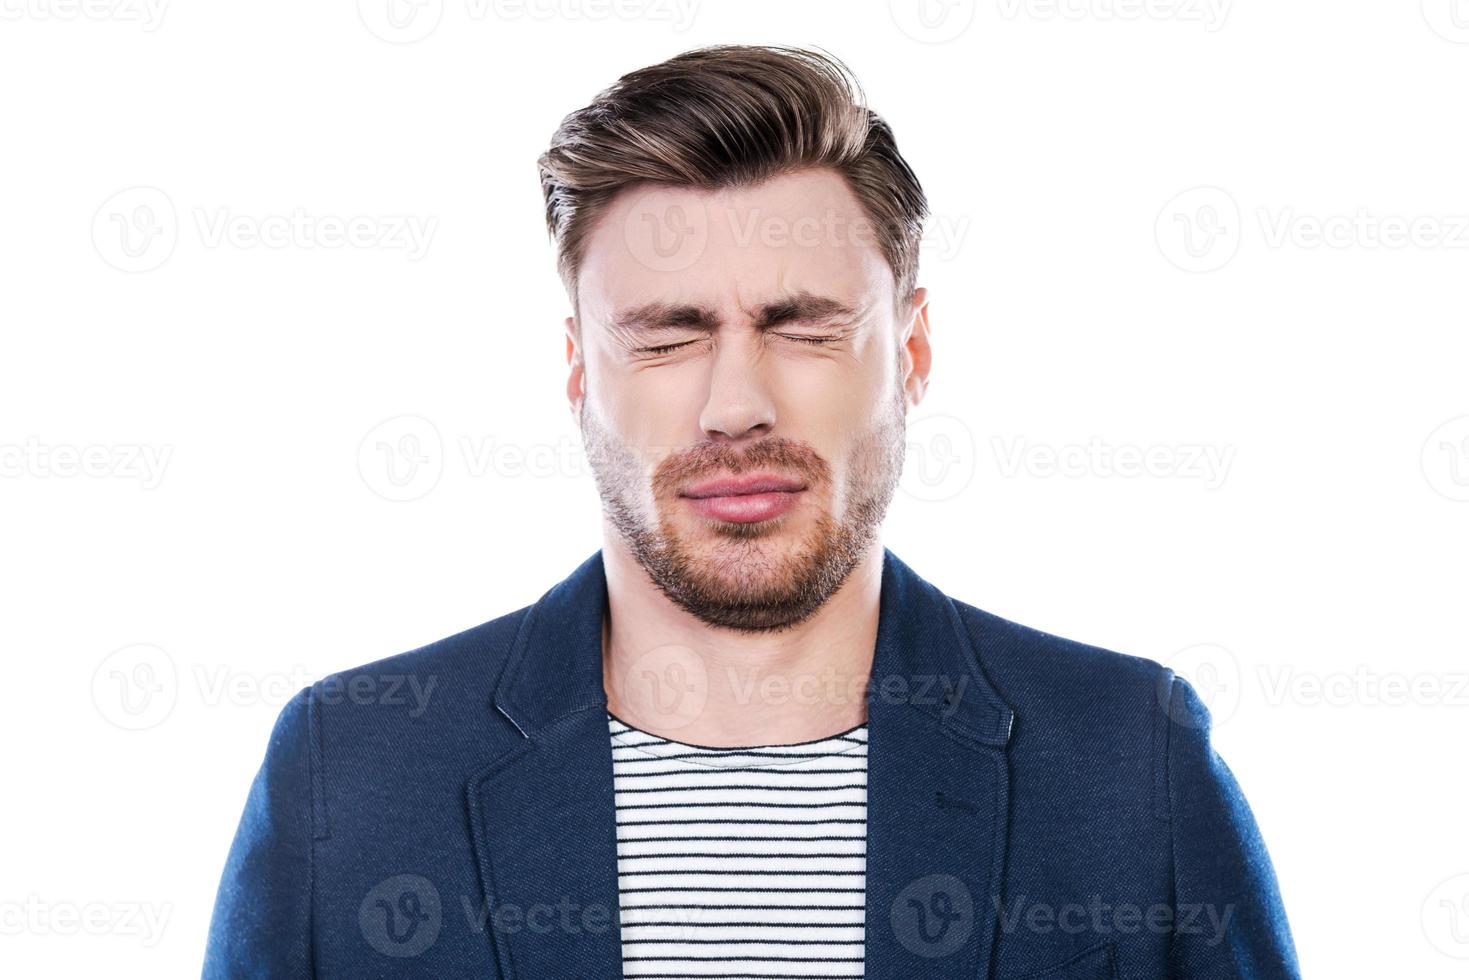 Oh no Portrait of young man expressing negativity and keeping eyes closed while standing against white background photo